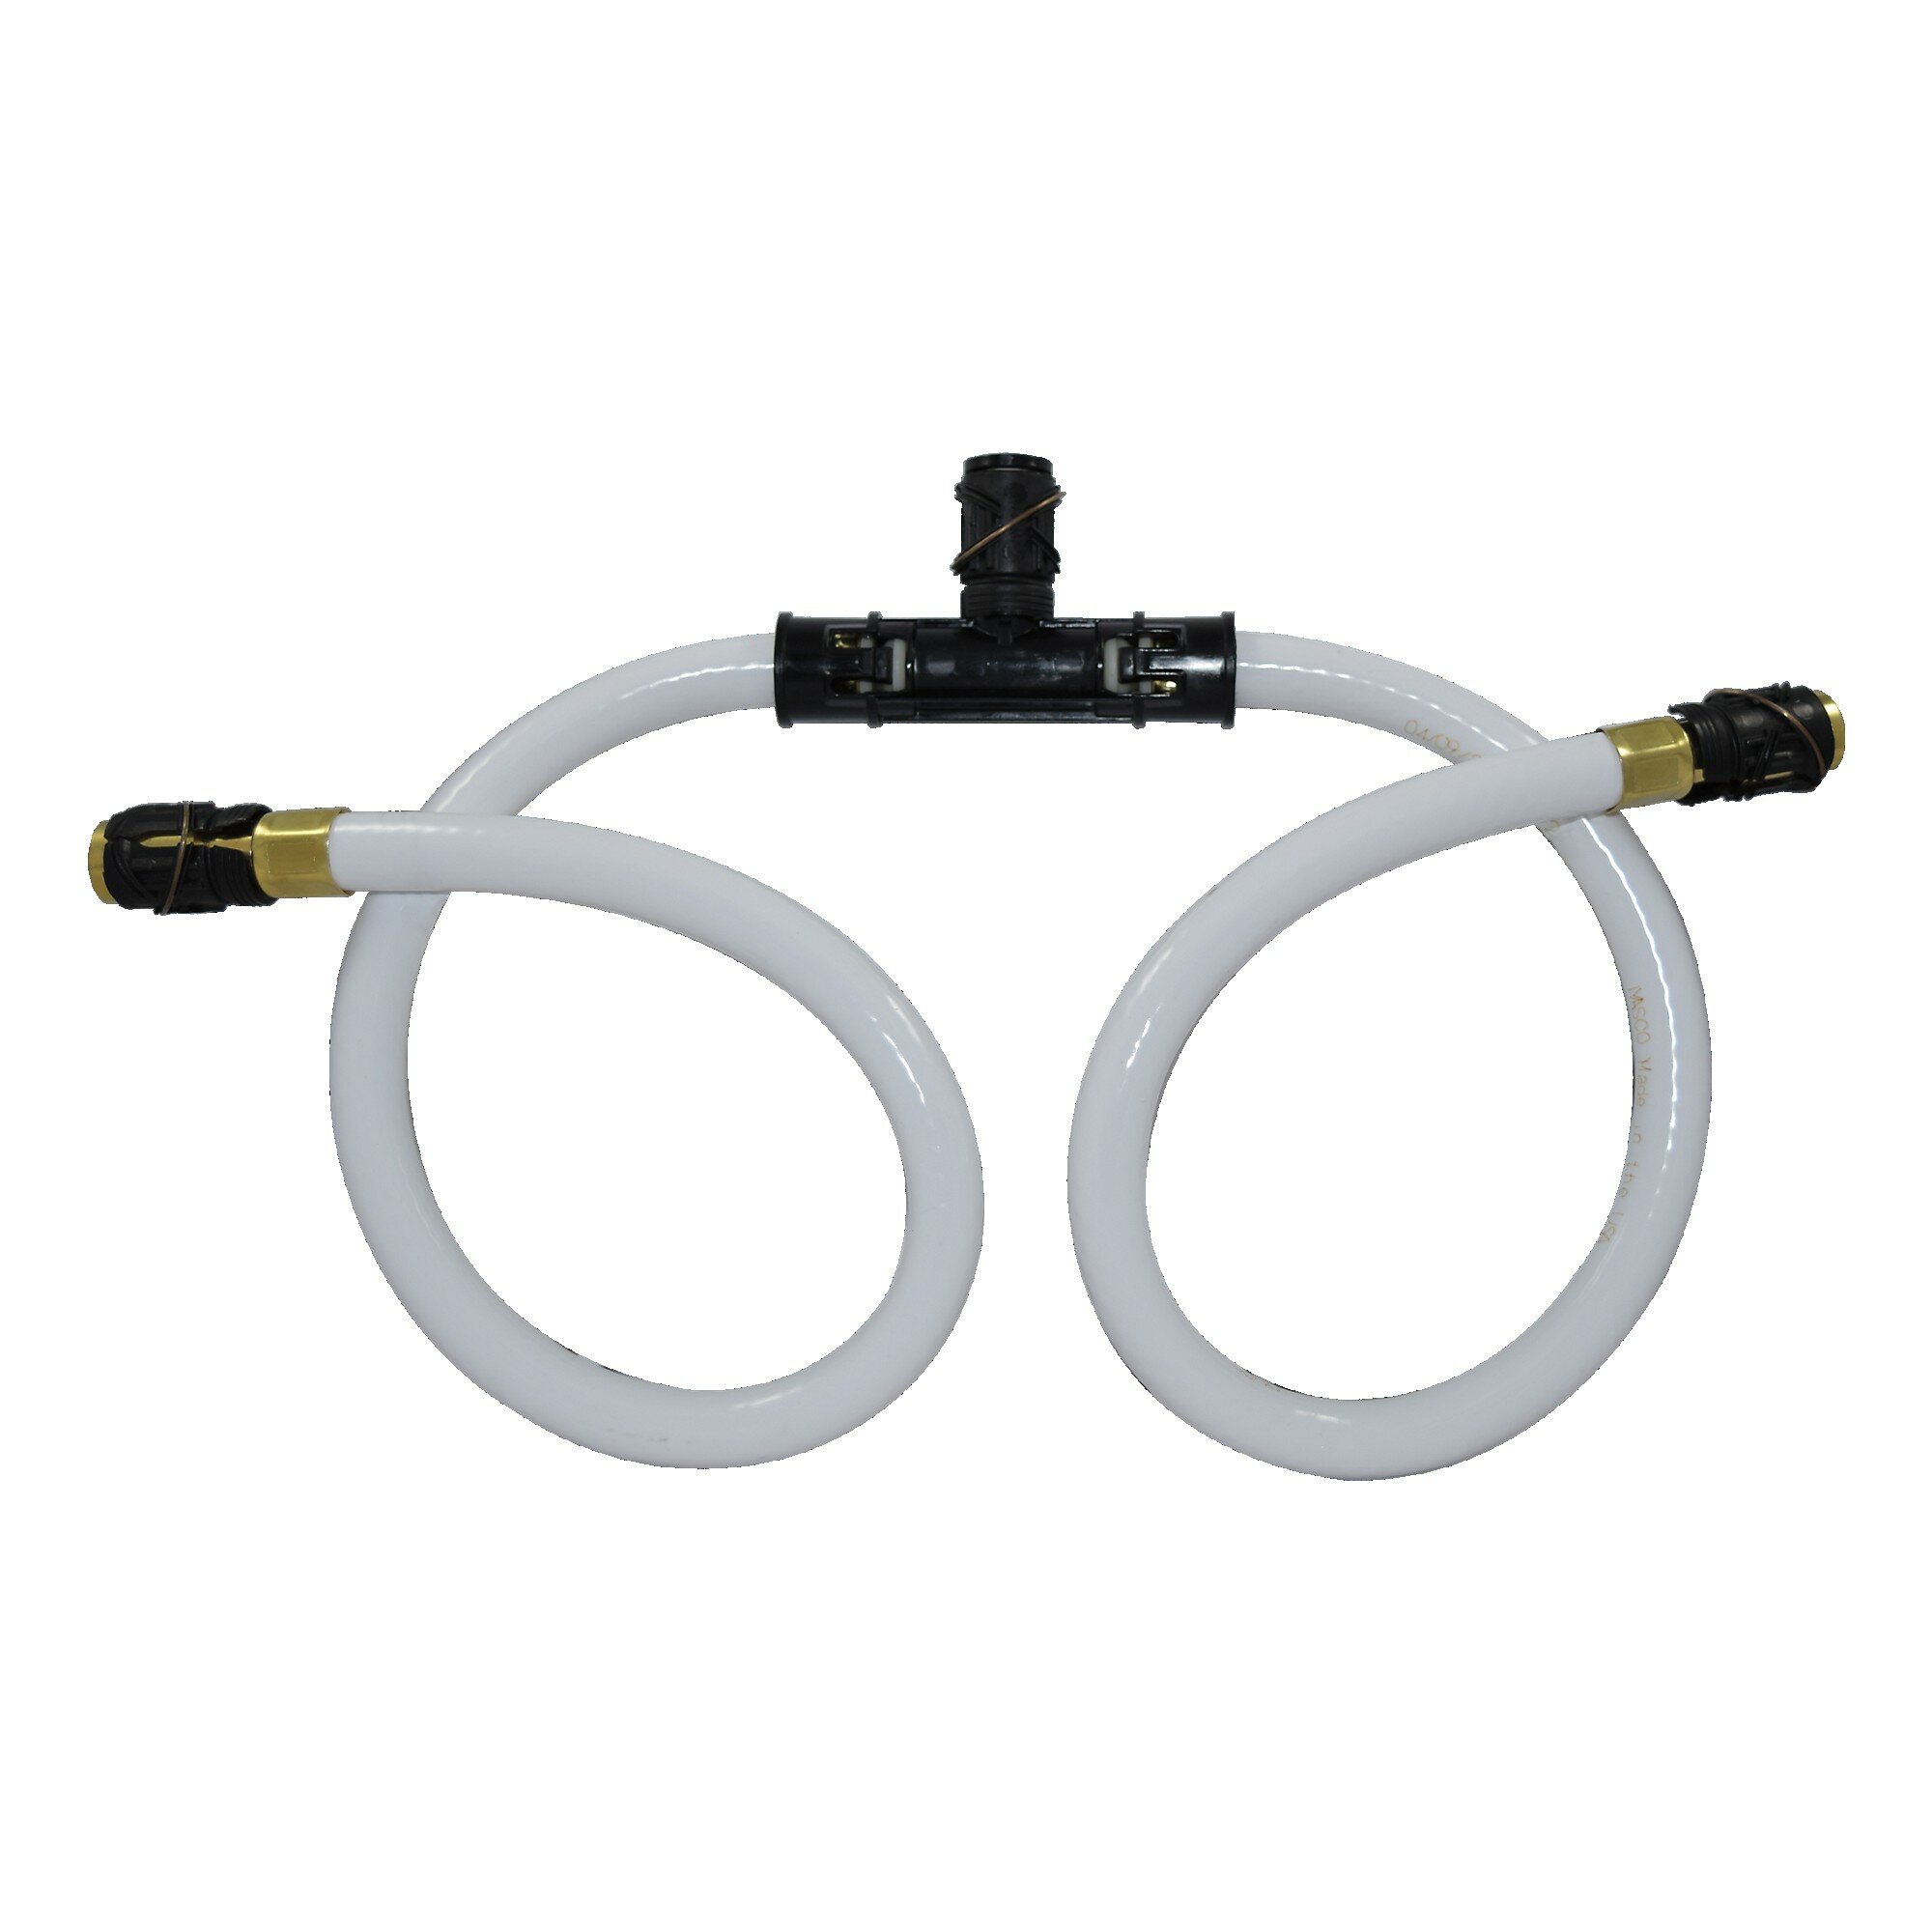 Rp34352 Delta Victorian Quick Connect Hose Assembly Bathroom